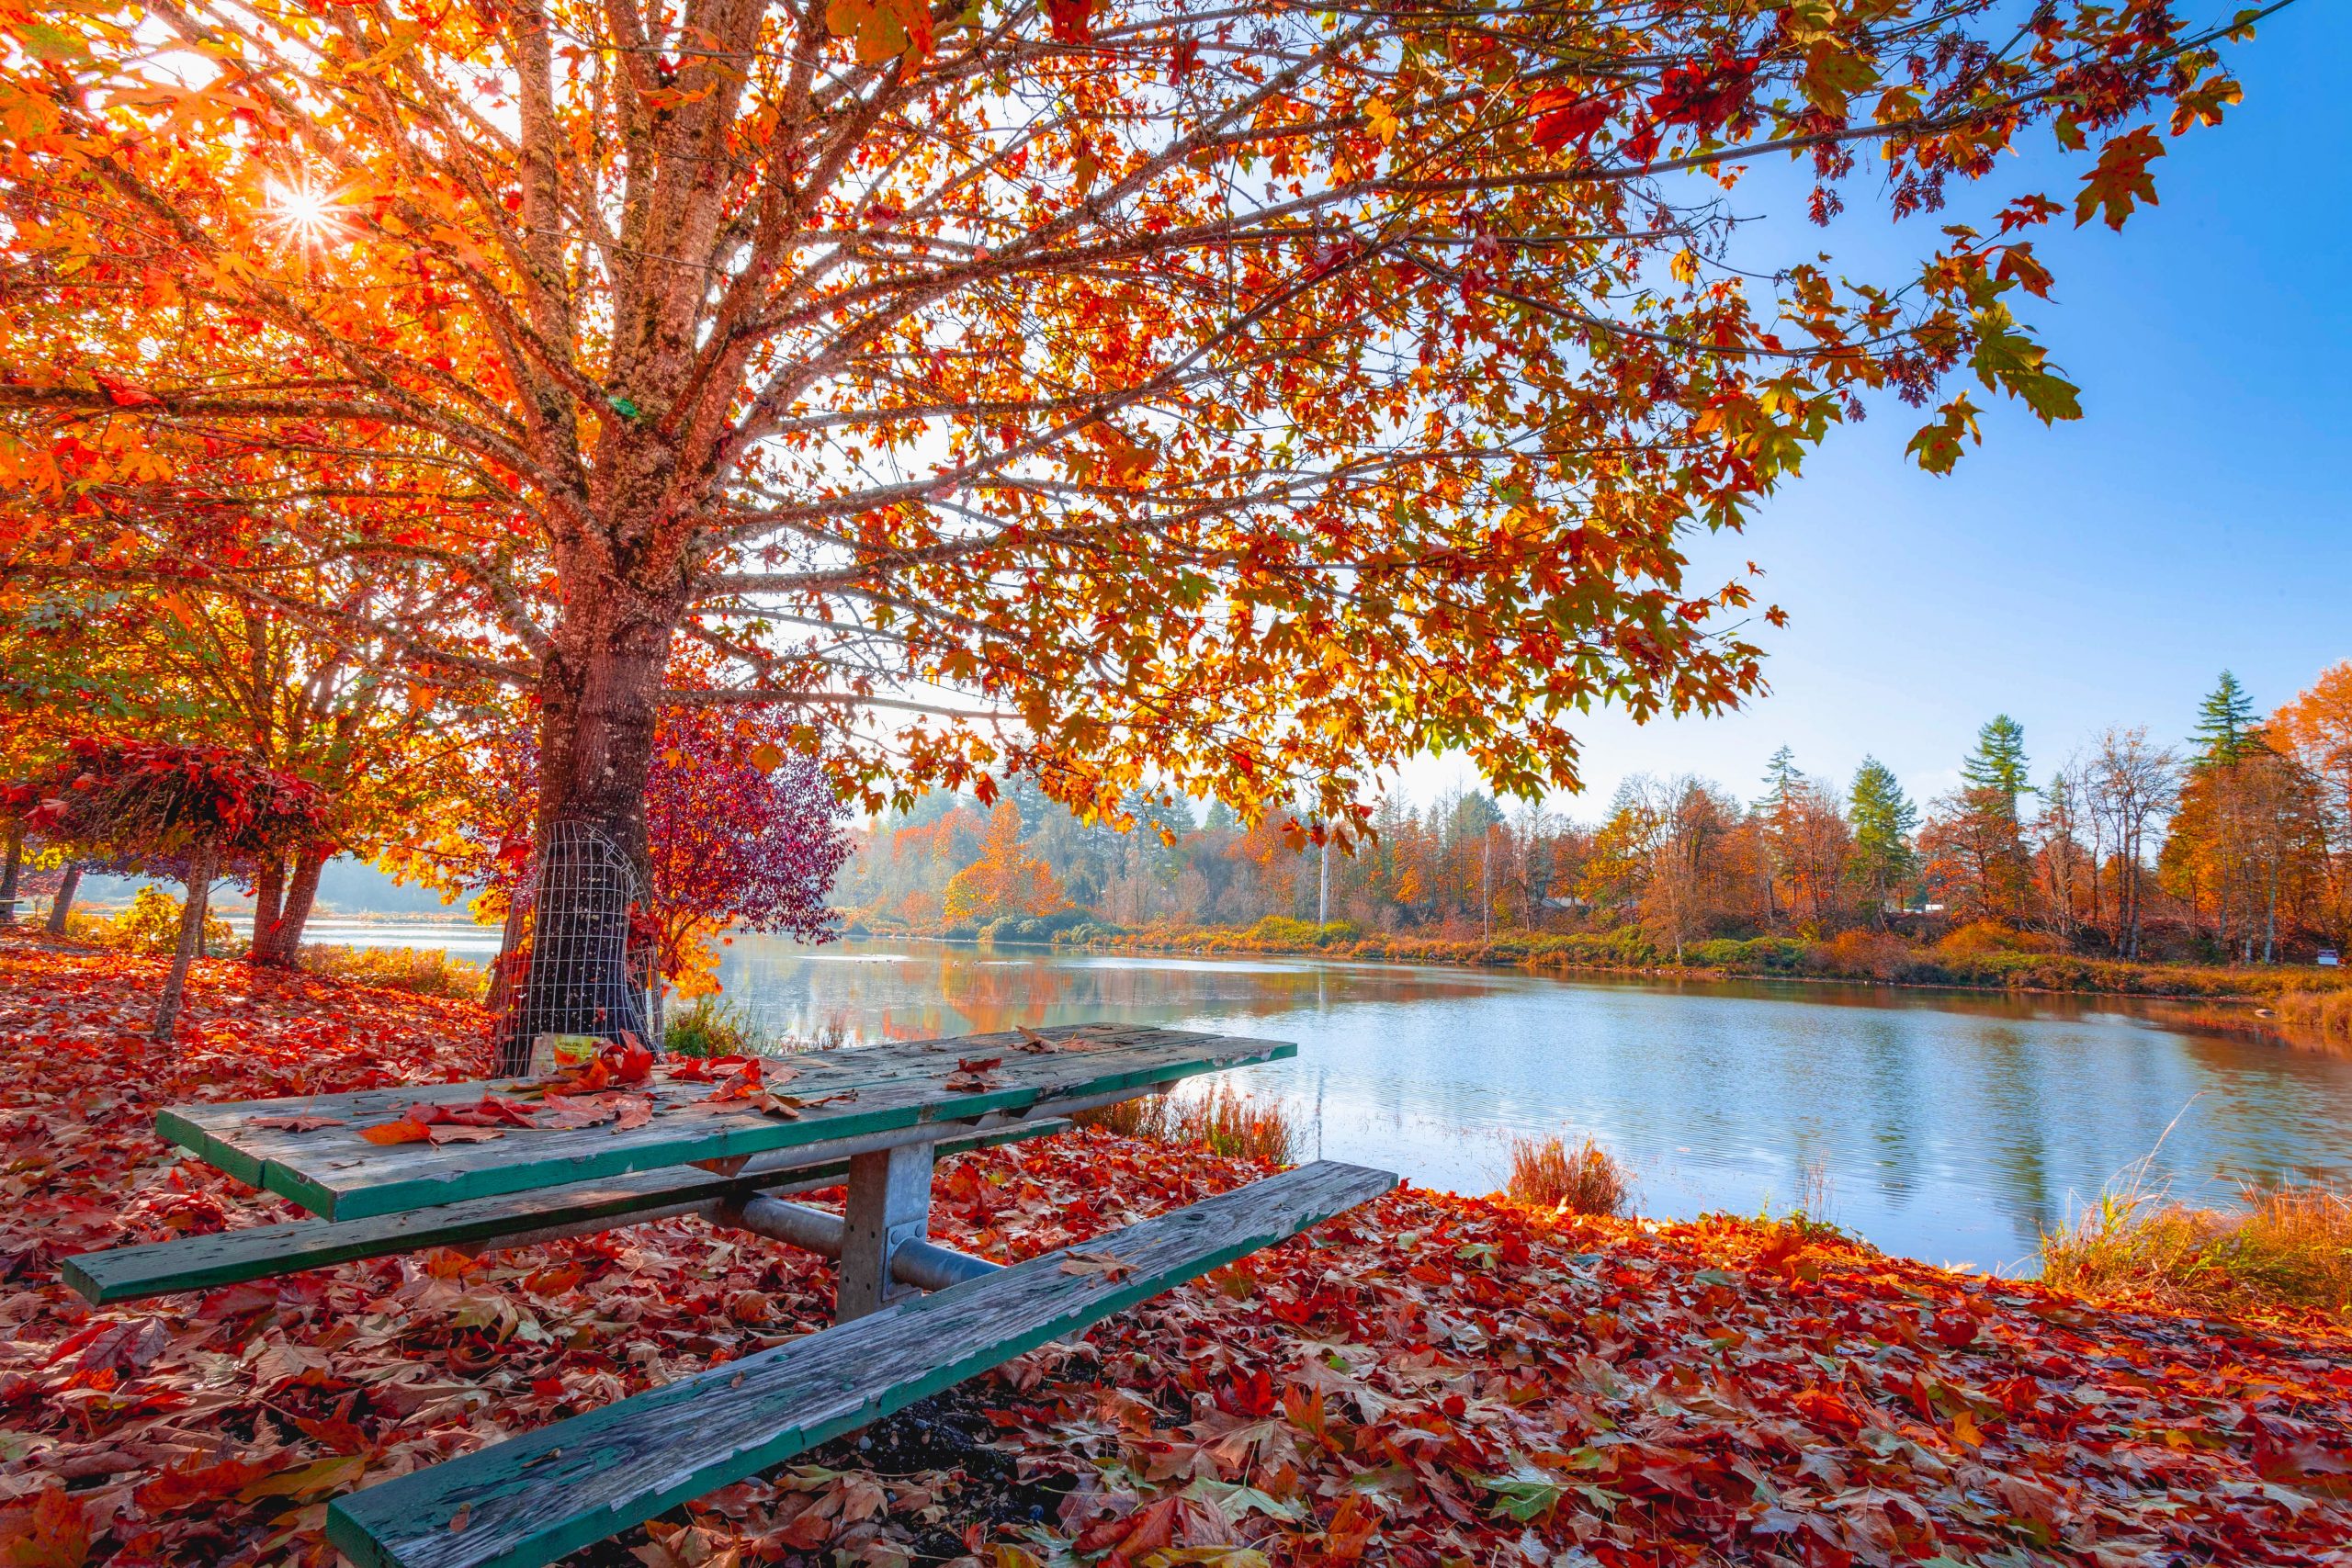 A picnic table sits among red autumn leaves by a small lake